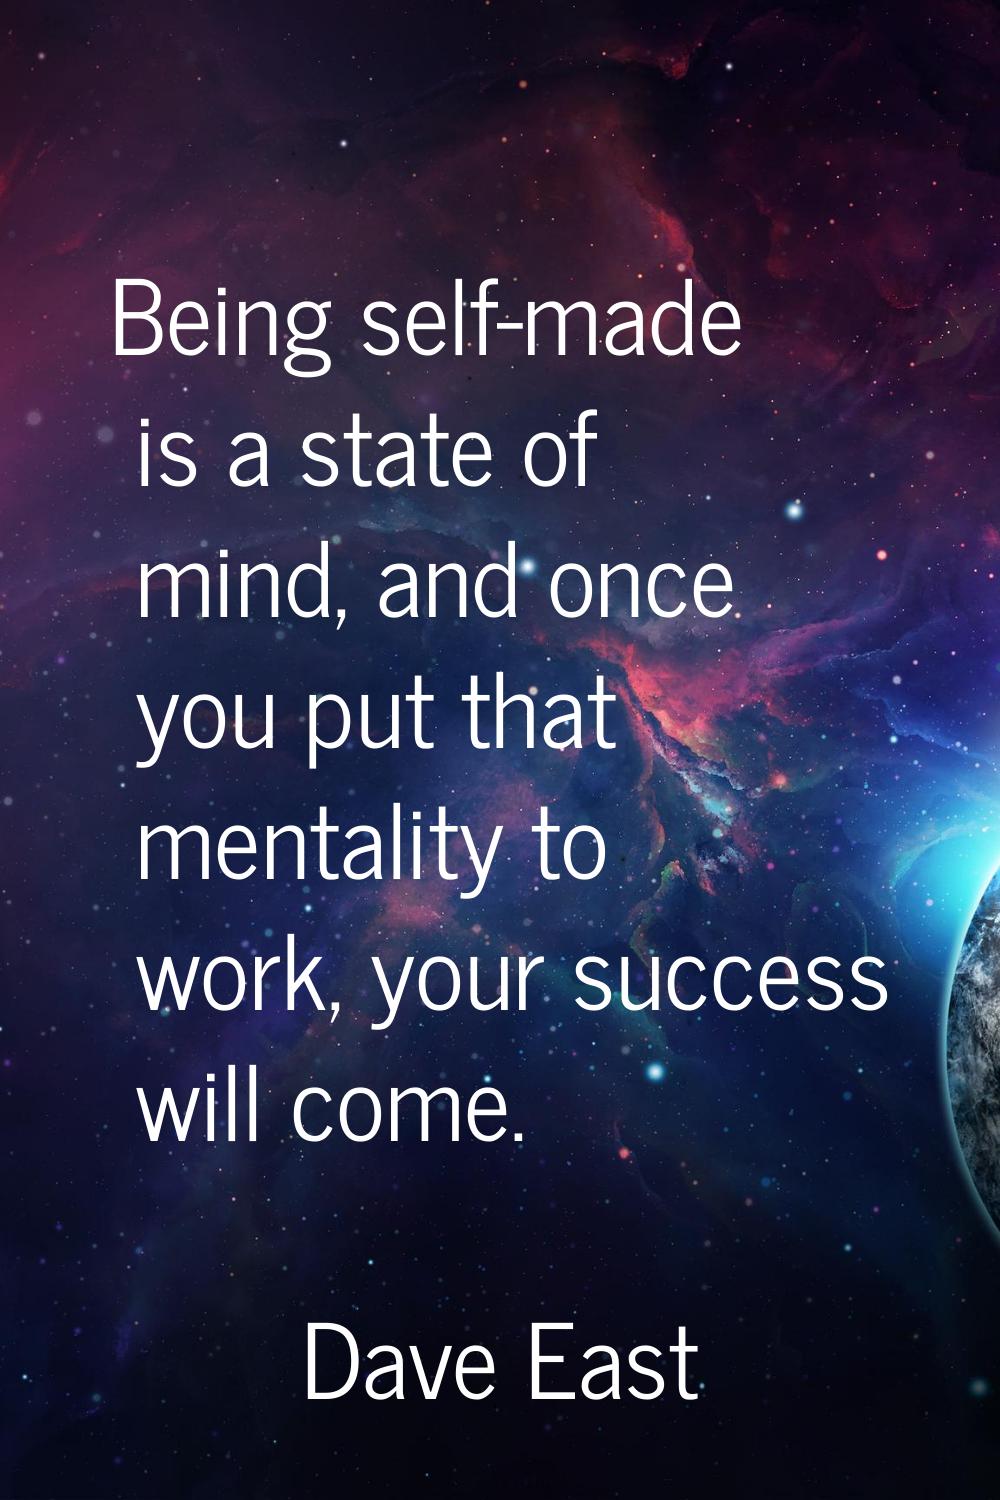 Being self-made is a state of mind, and once you put that mentality to work, your success will come